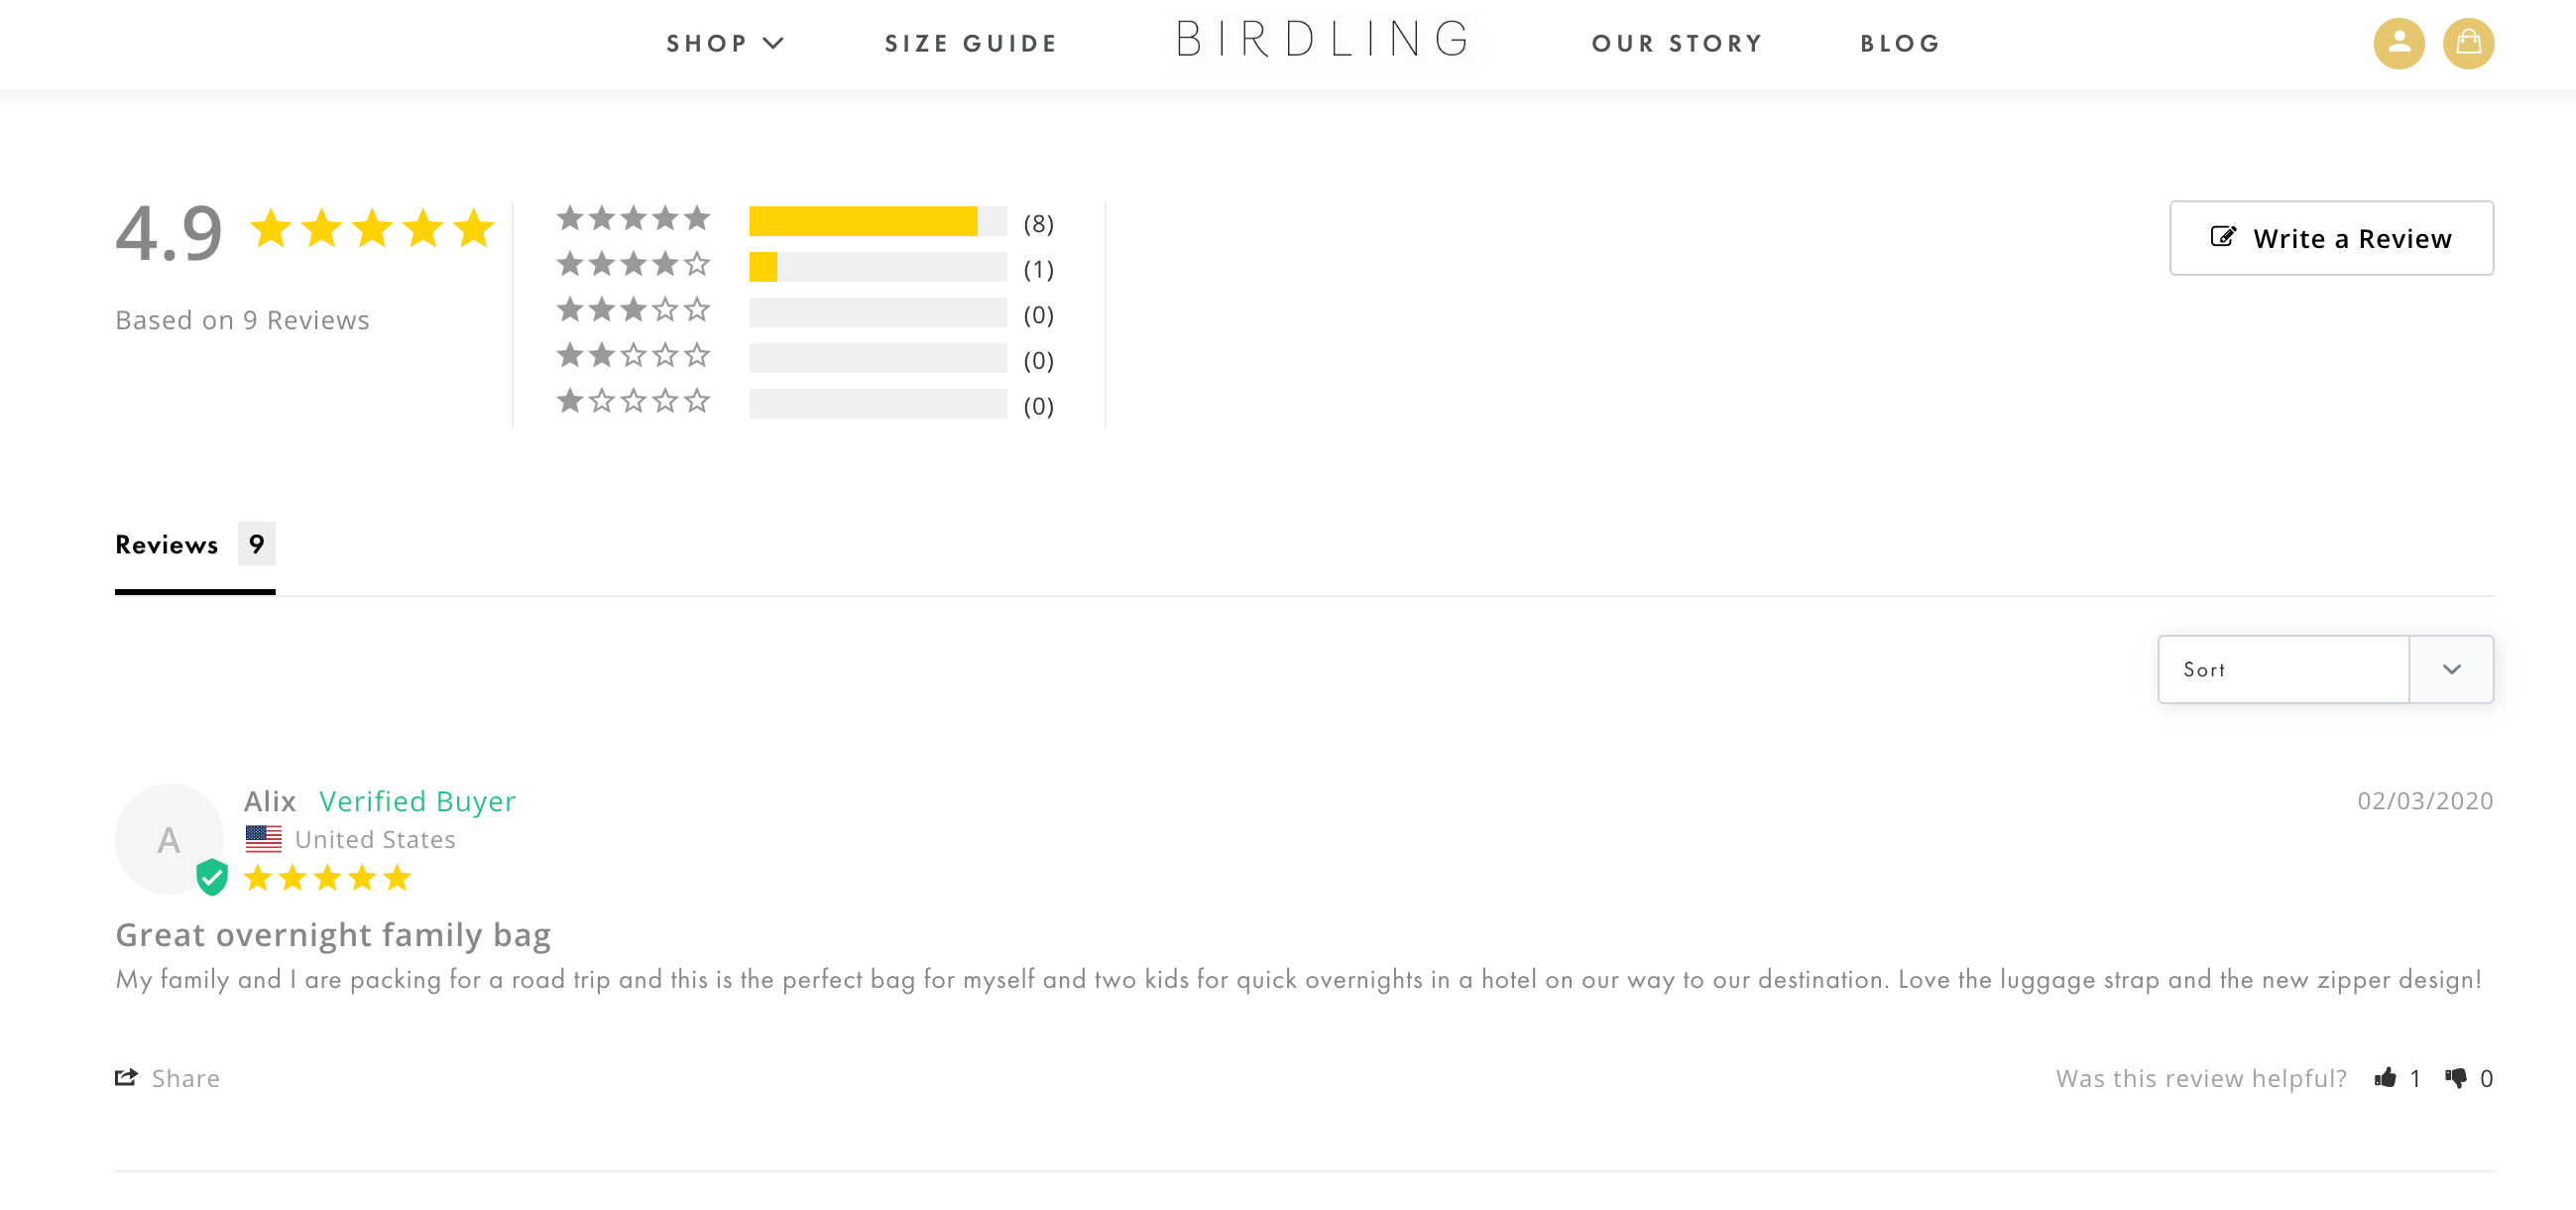 Birdling's review section at the bottom of the product page